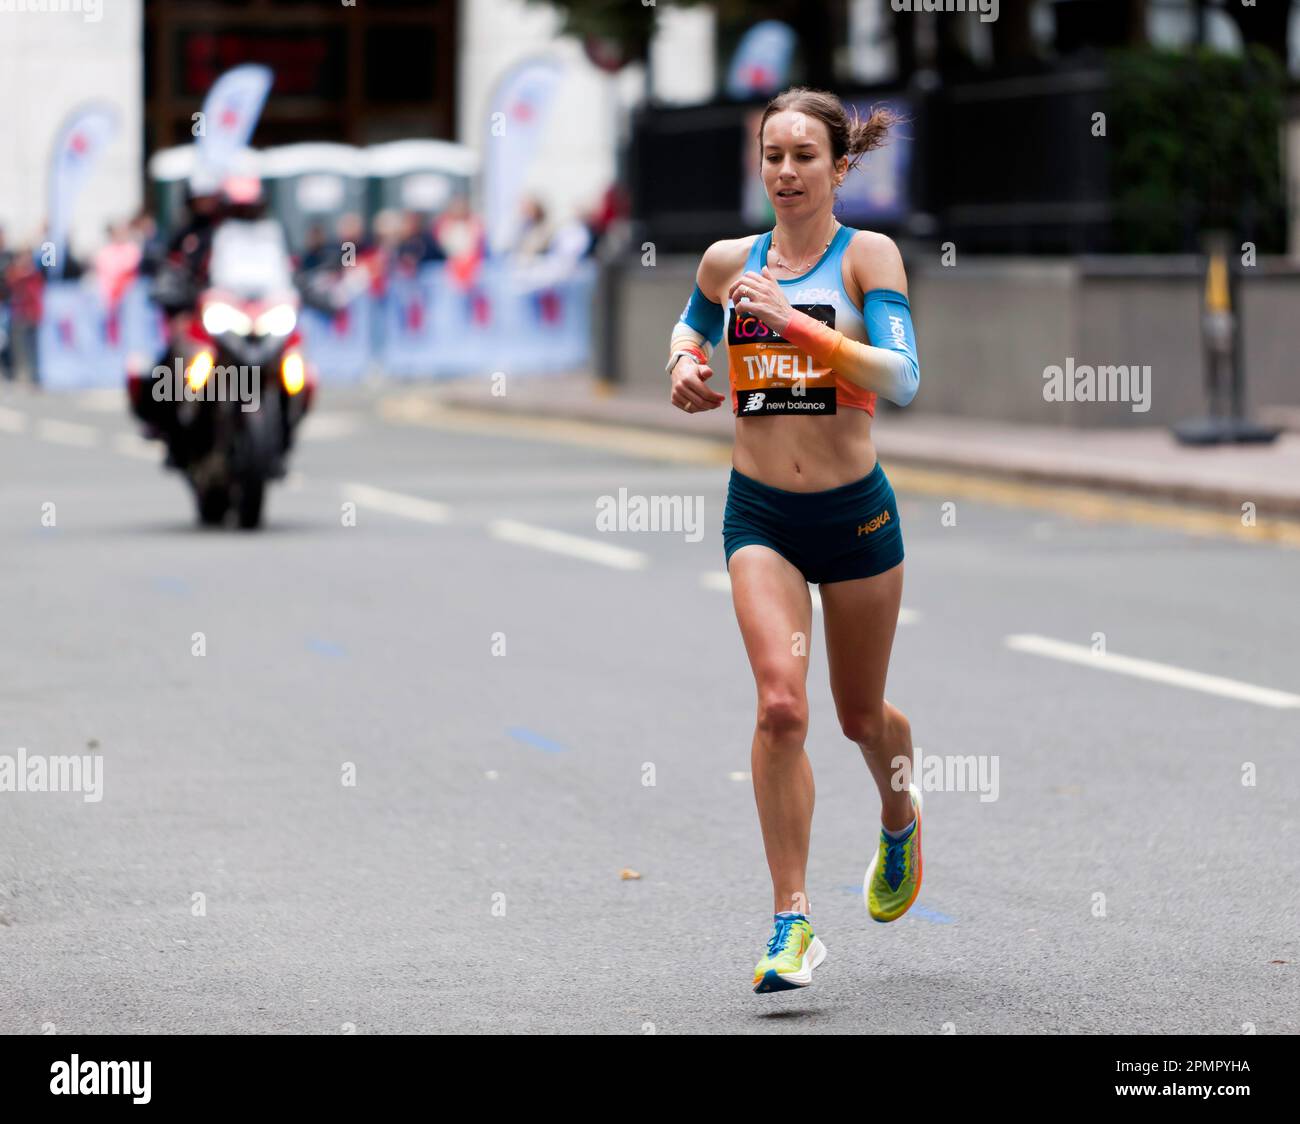 Stephanie Twell, passing through Cabot Square, on her way to finish 12th in the Women's Elite Race, during the 2022 London Marathon. Stock Photo